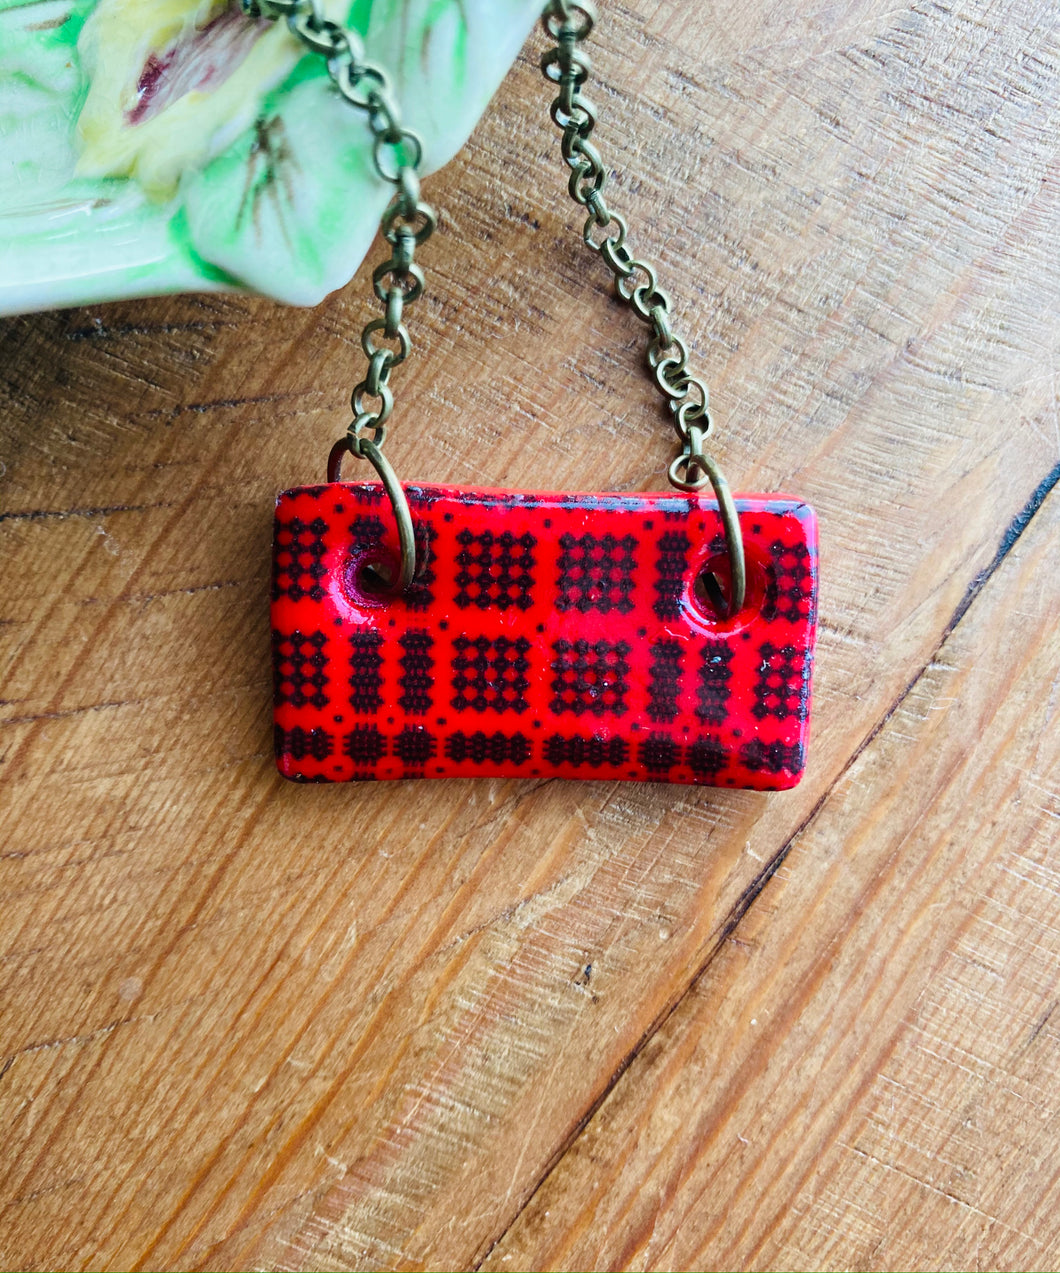 Mwclis Carthen Gymreig Coch Perthyn / Red Perthyn Welsh Tapestry Necklace